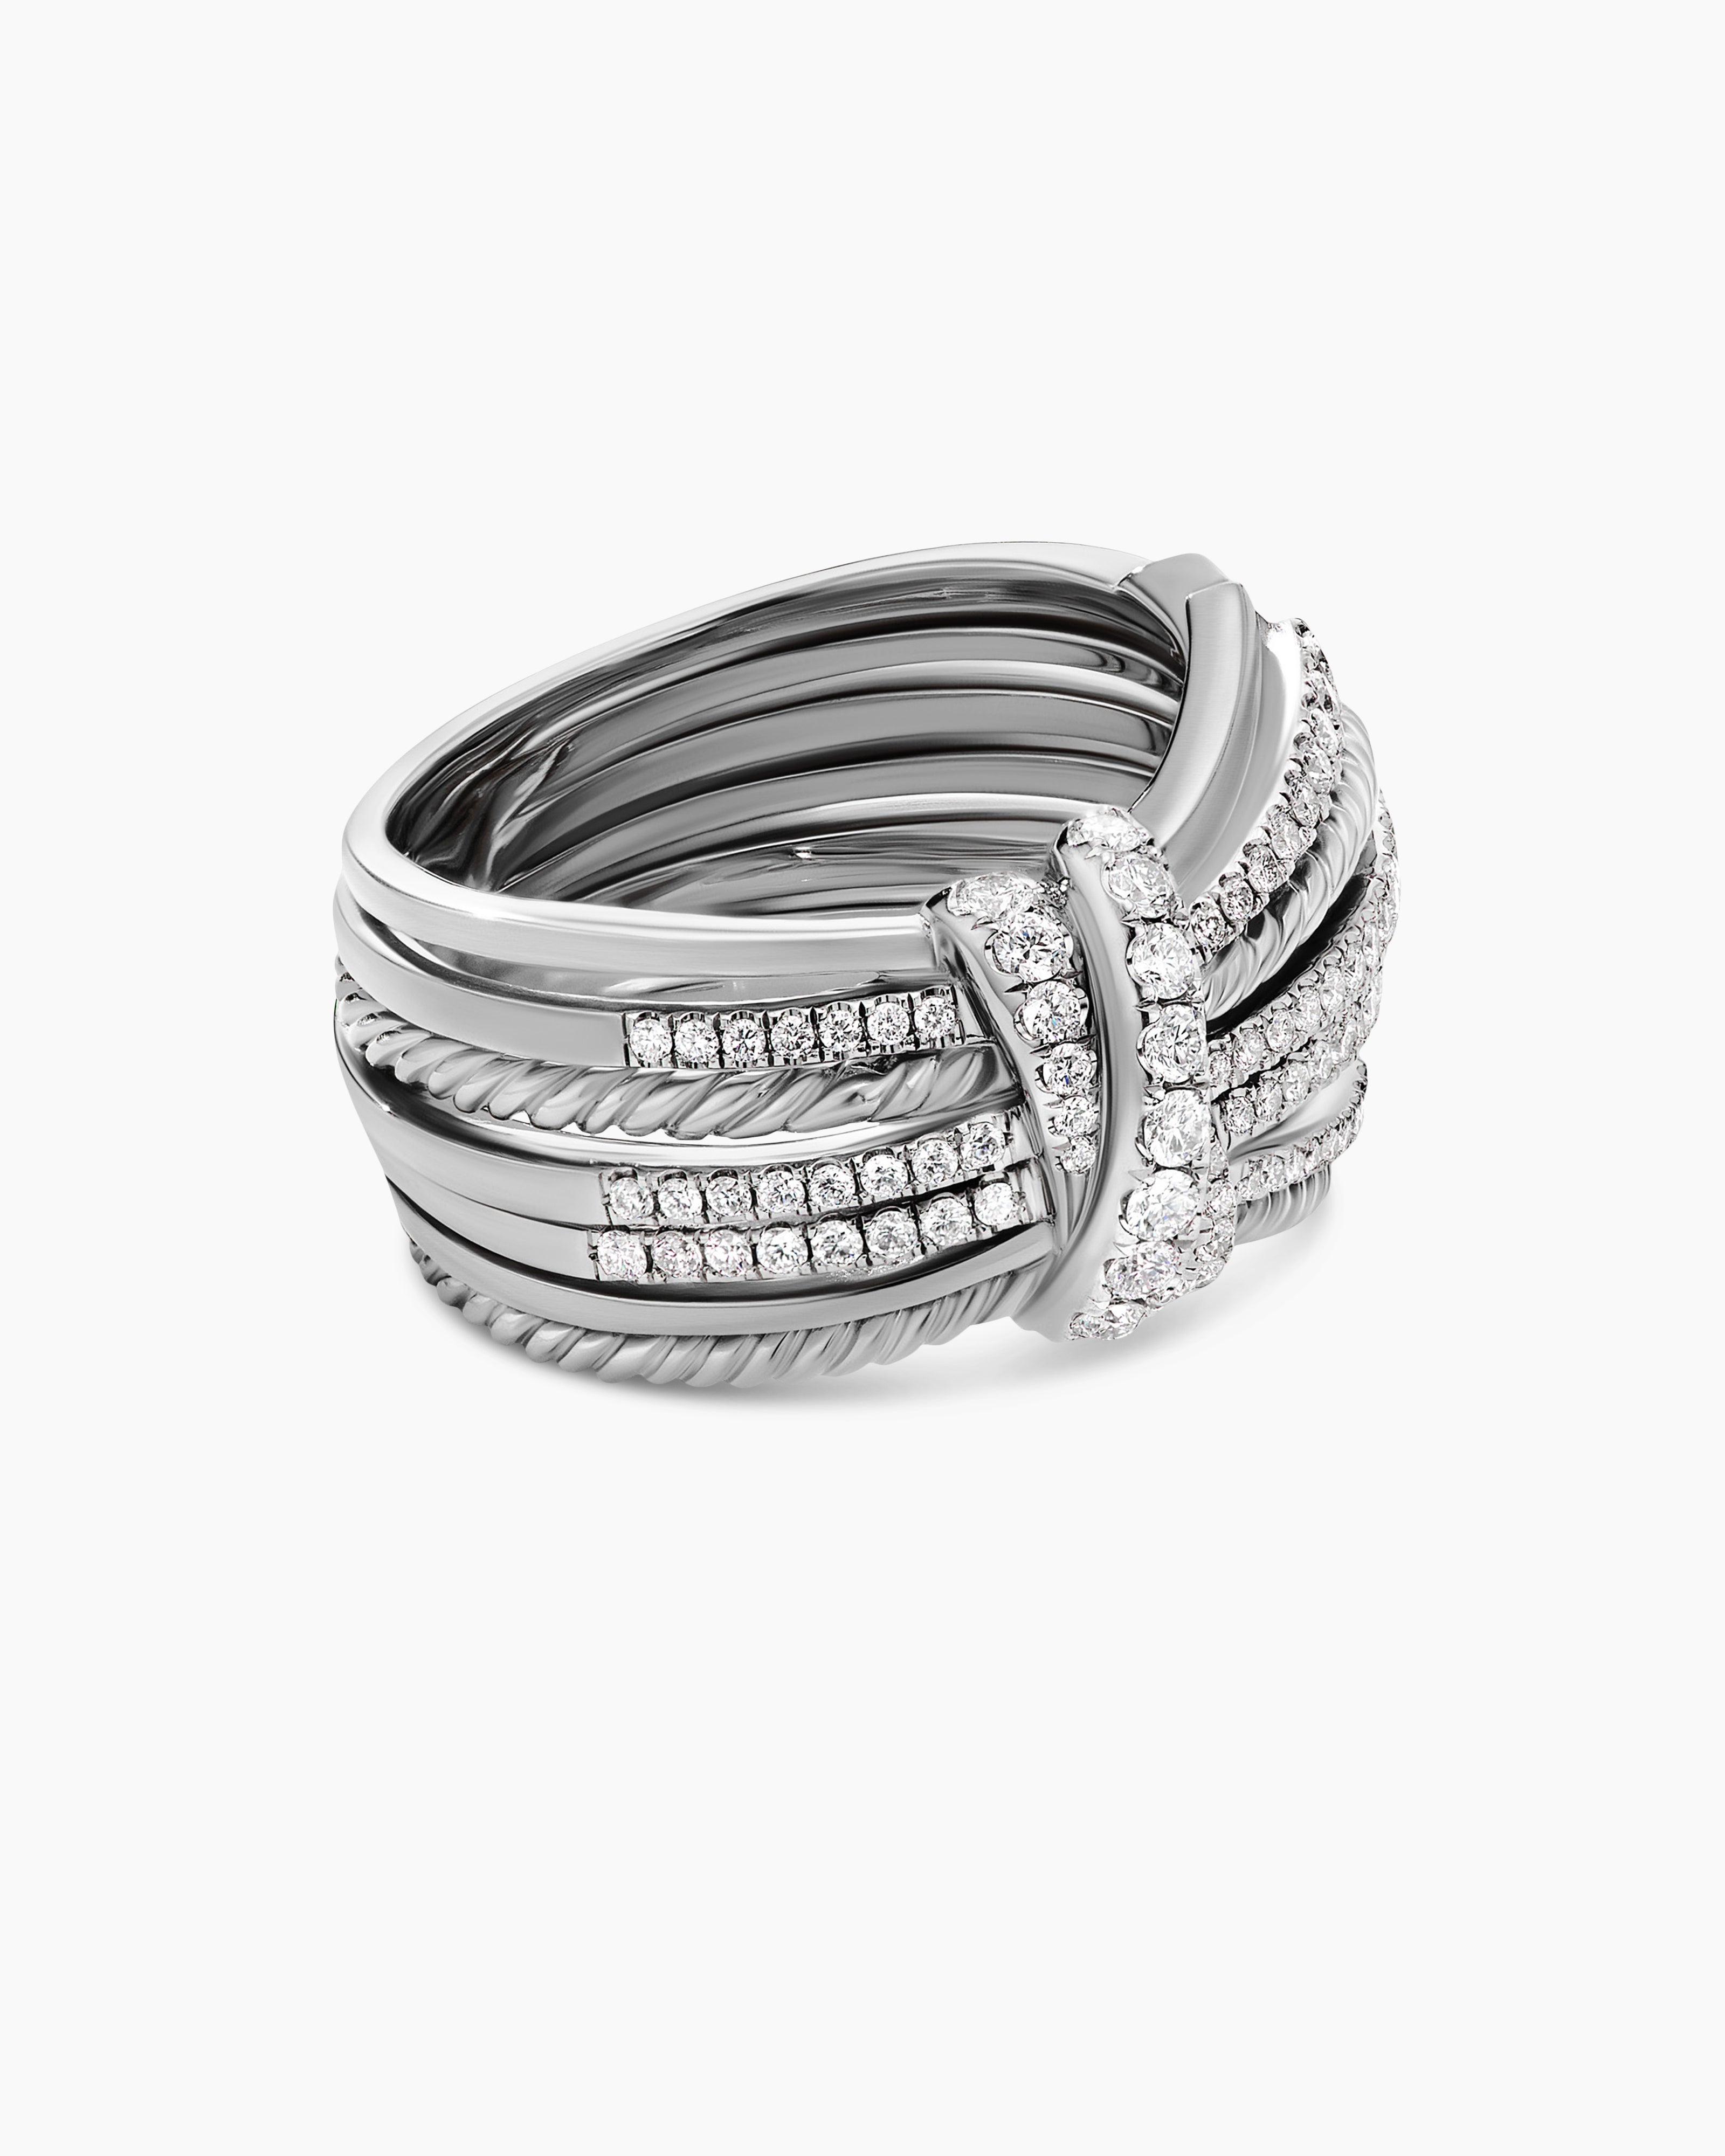 Thoroughbred Loop Ring in Sterling Silver with Diamonds, 4mm